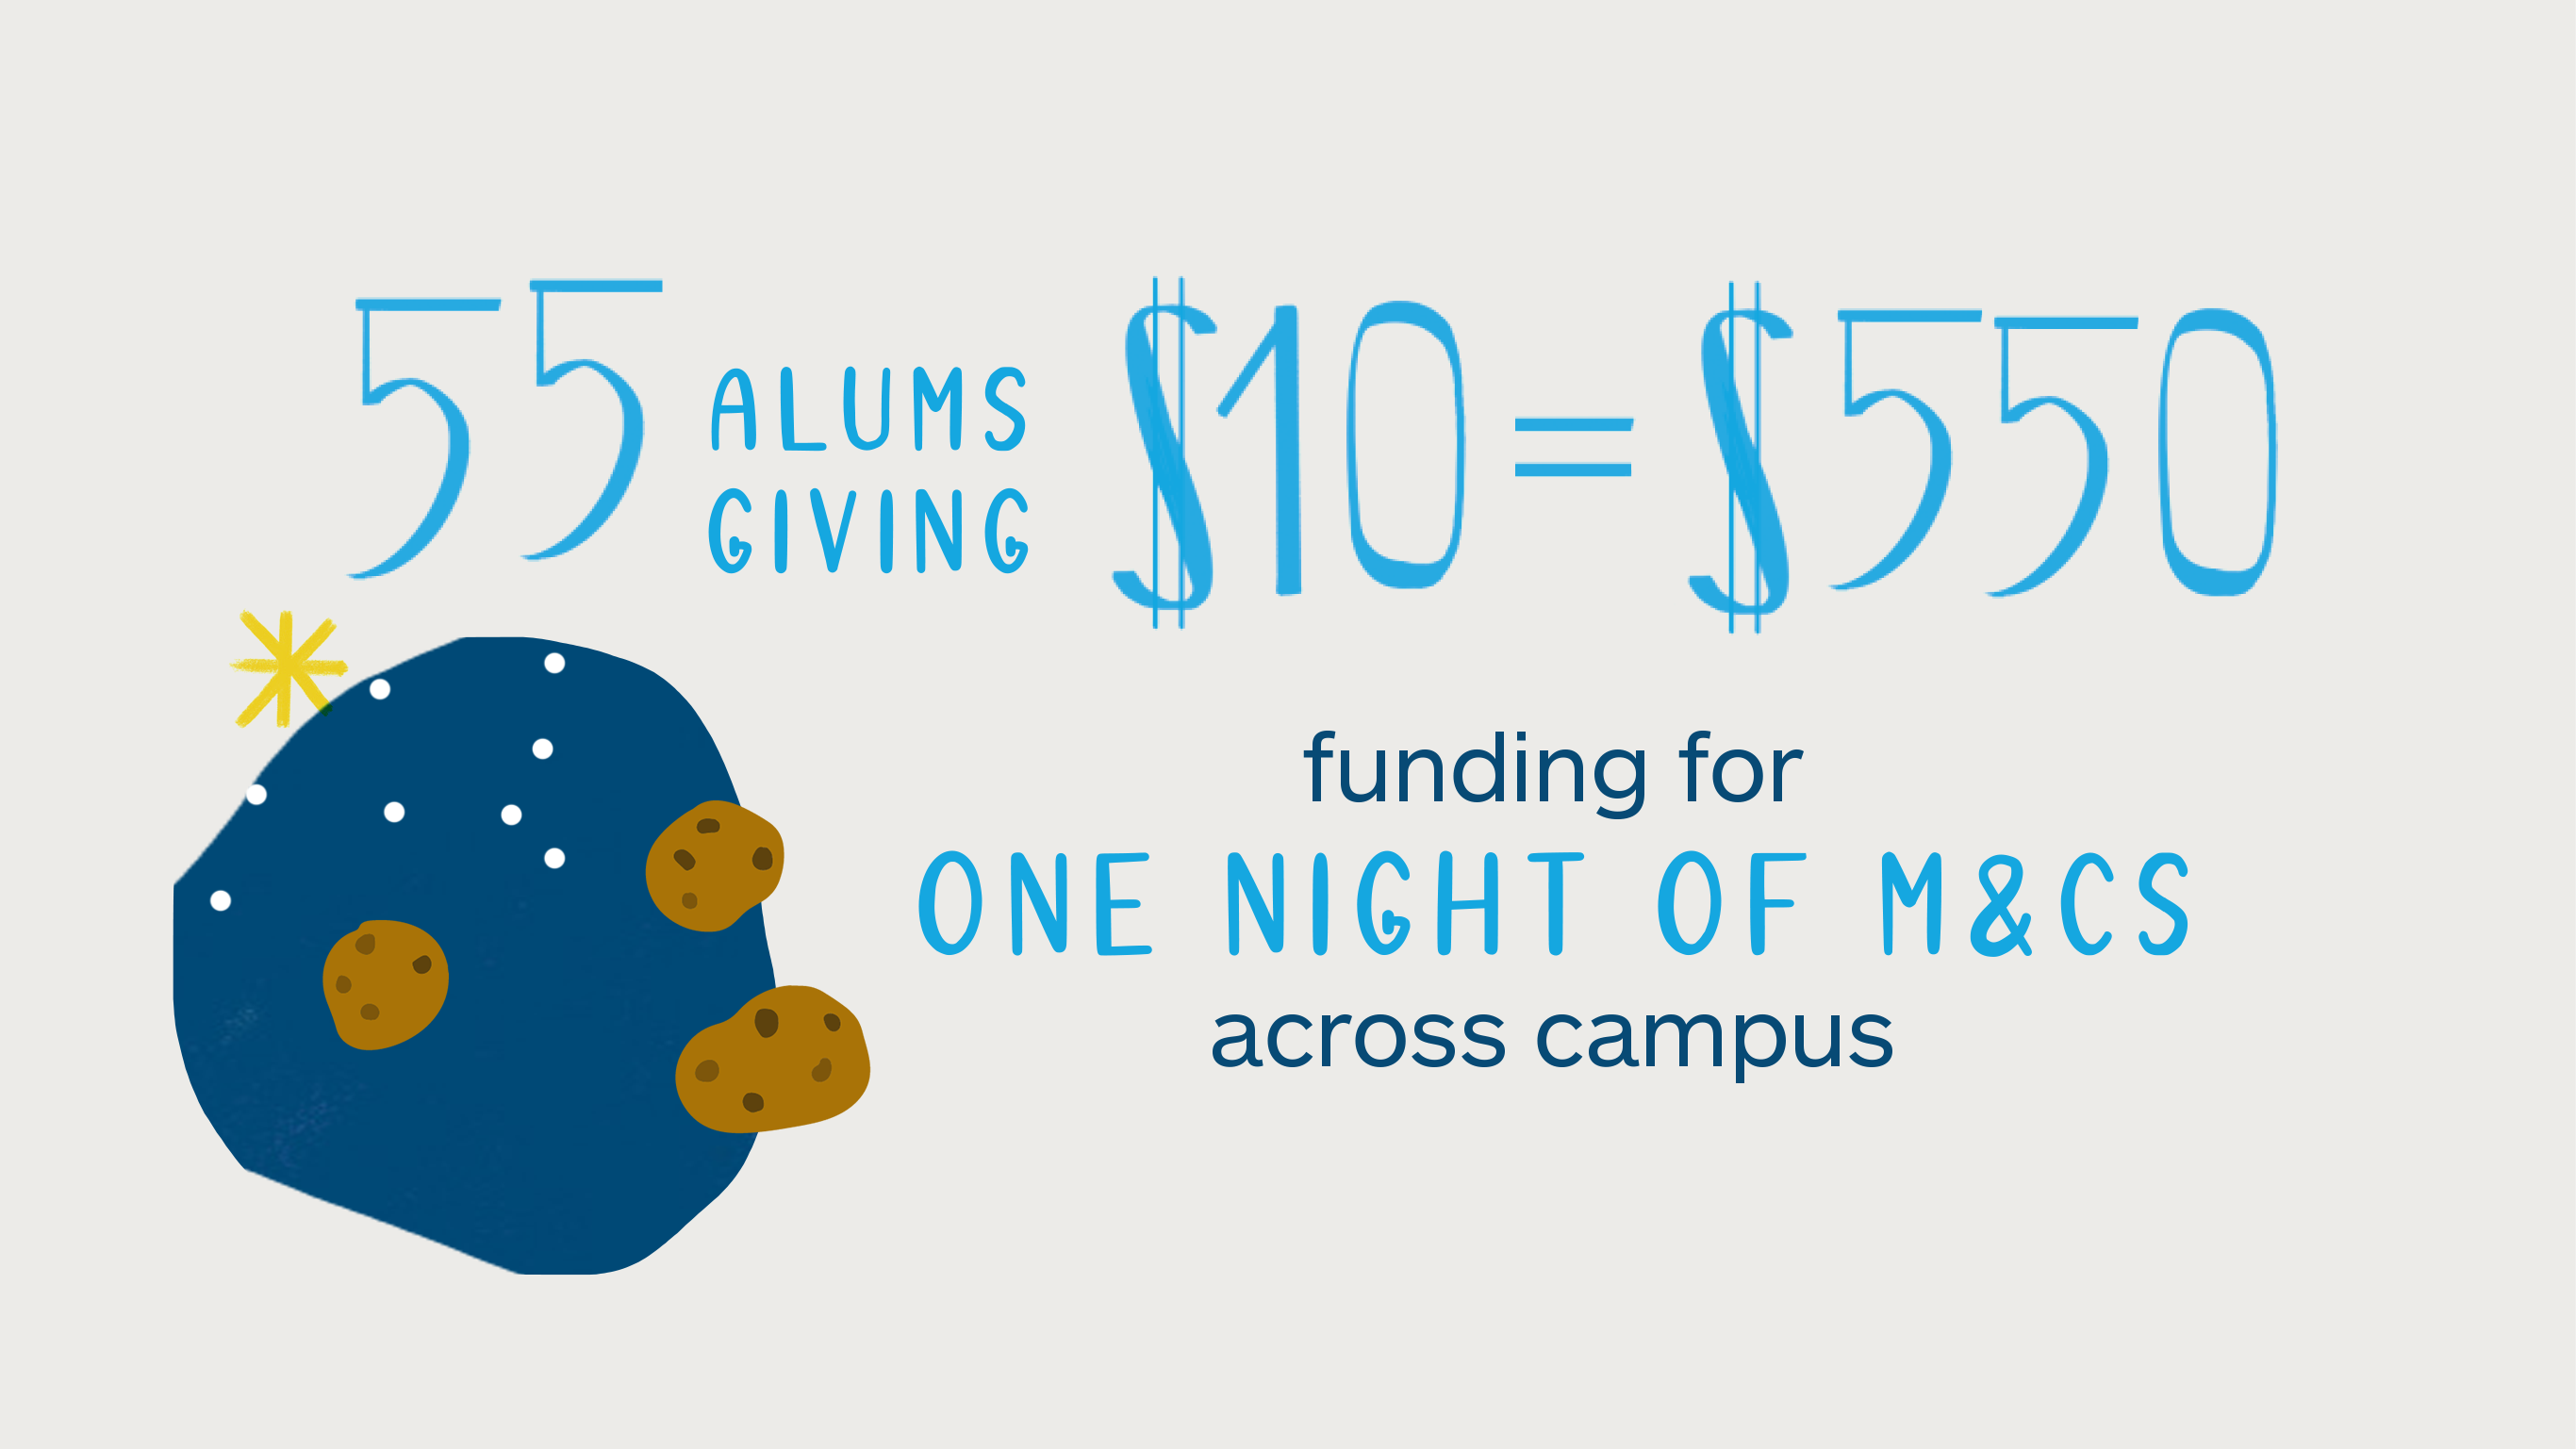 55 alums giving $10 = $550 funding for one night of M&Cs across campus